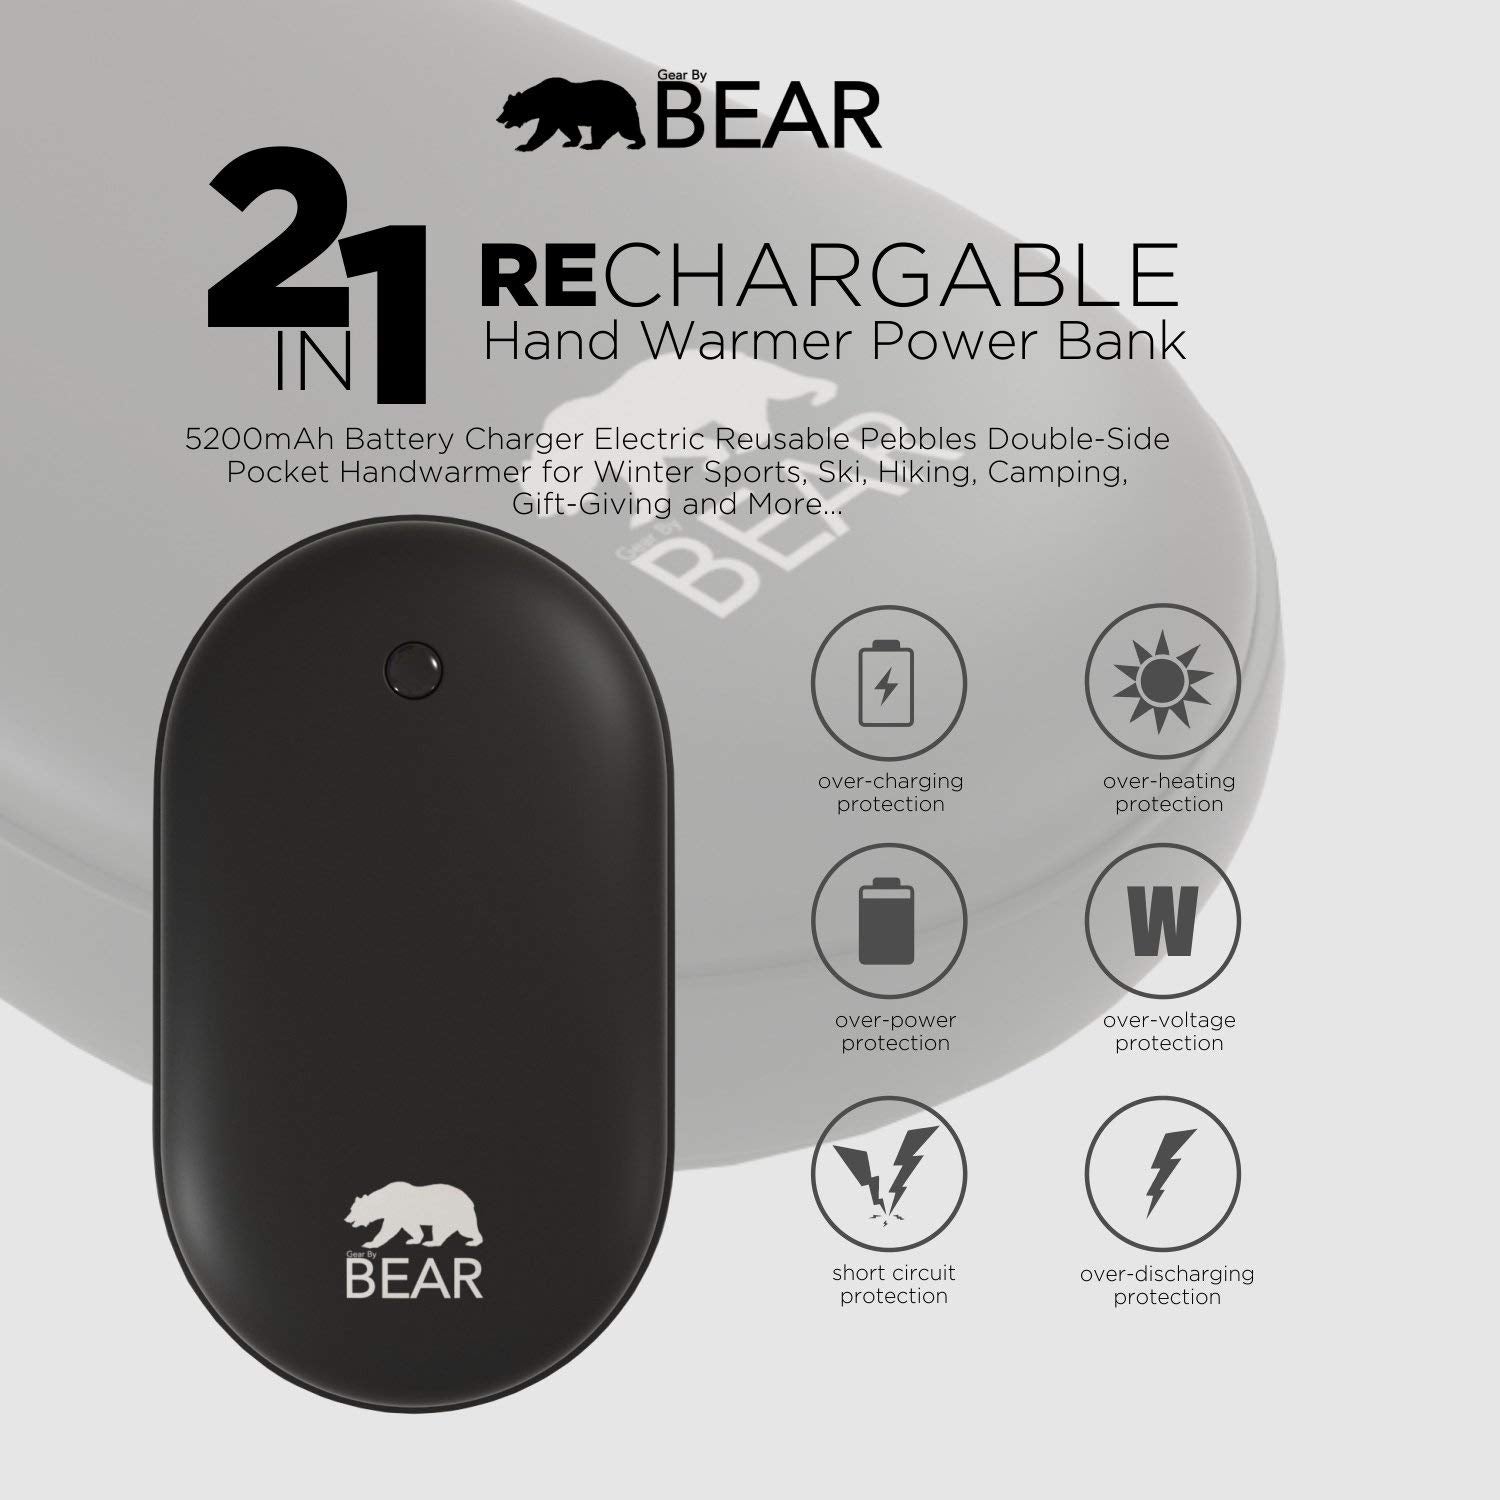 BearPOWER Rechargeable Hand Warmer - 2018 Review